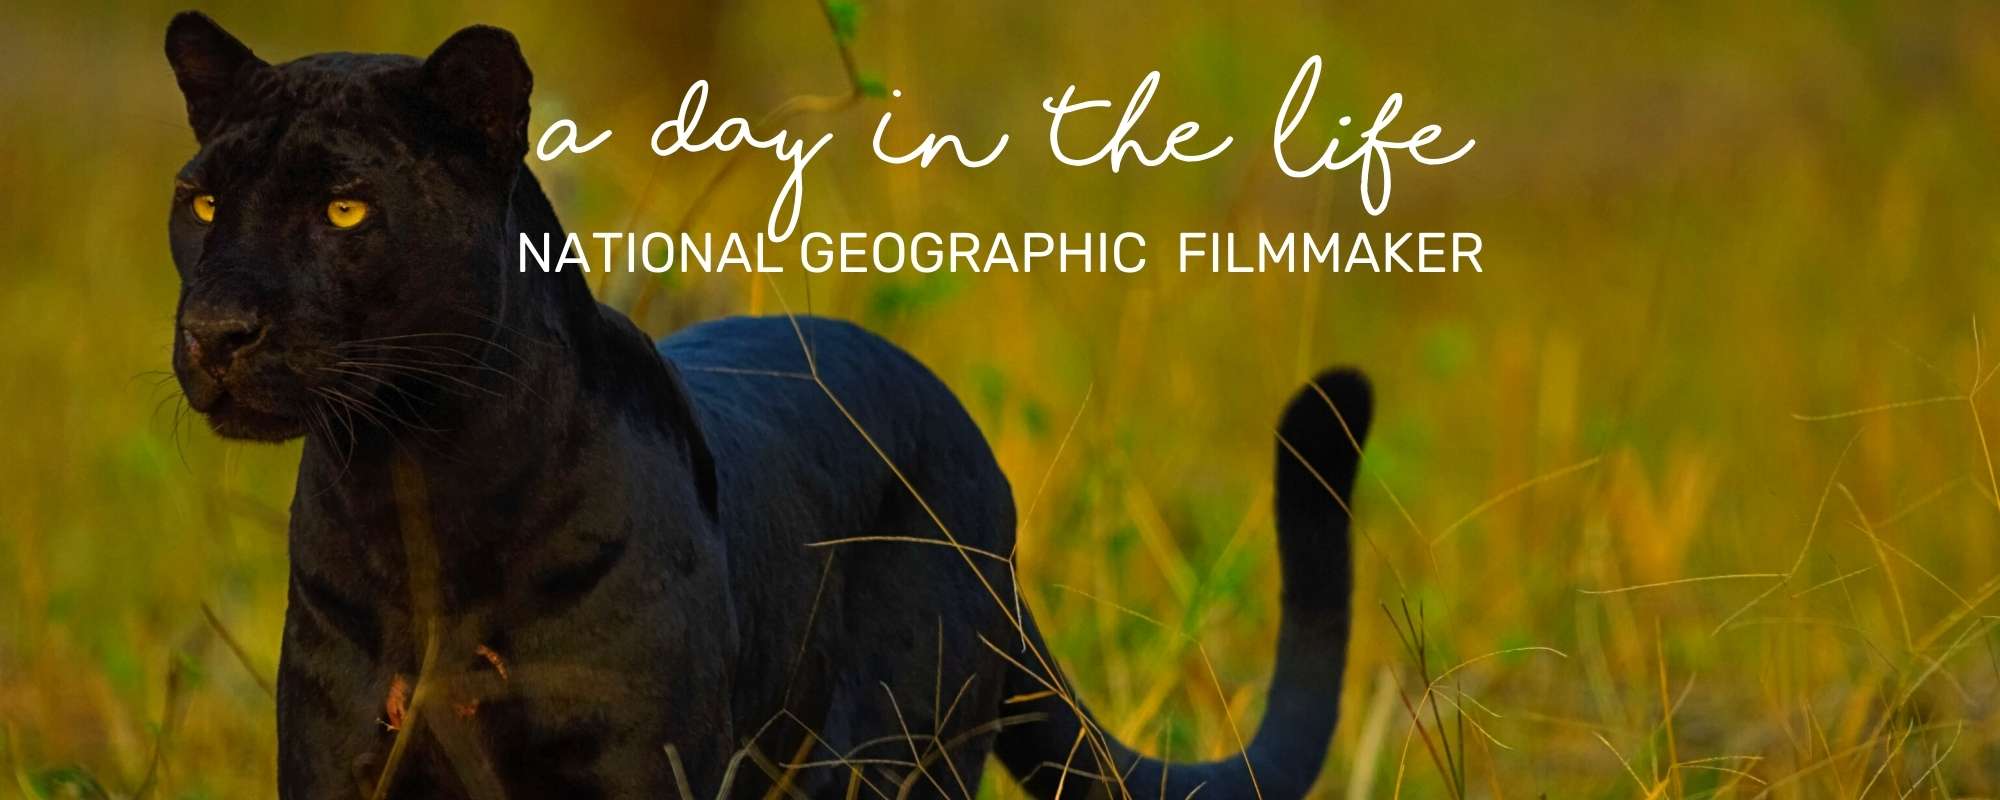 A DAY IN THE LIFE OF A NATIONAL GEOGRAPHIC FILMMAKER